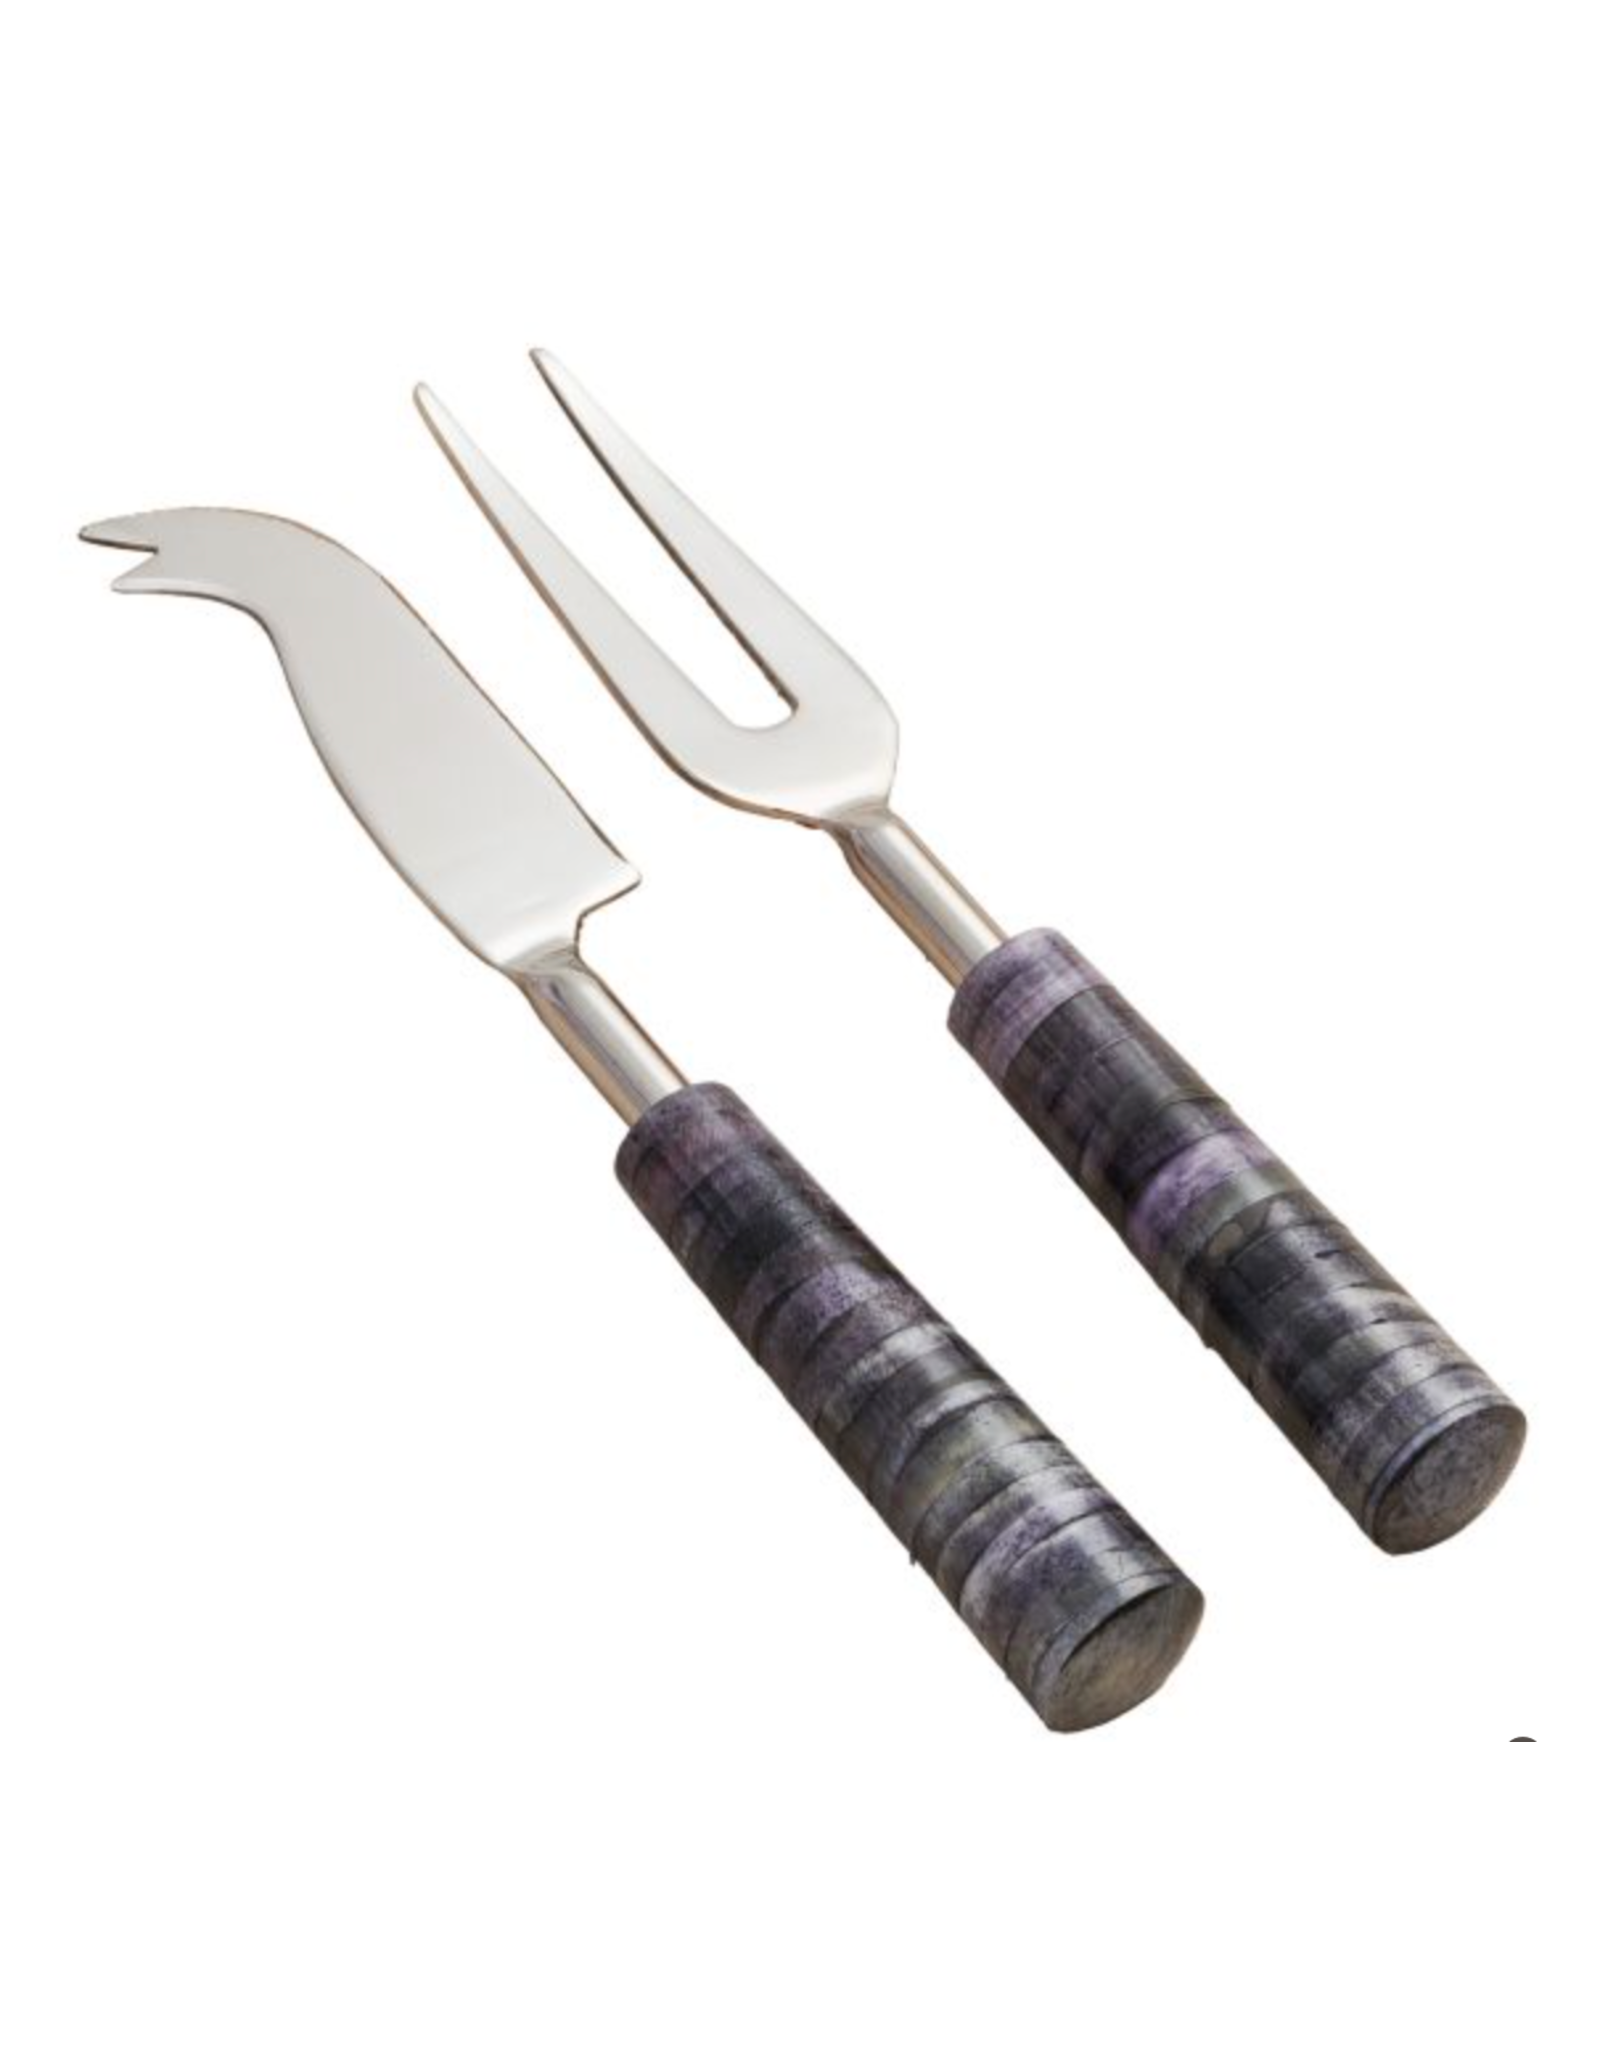 Texxture Fiori Cheese Knives Set of 2